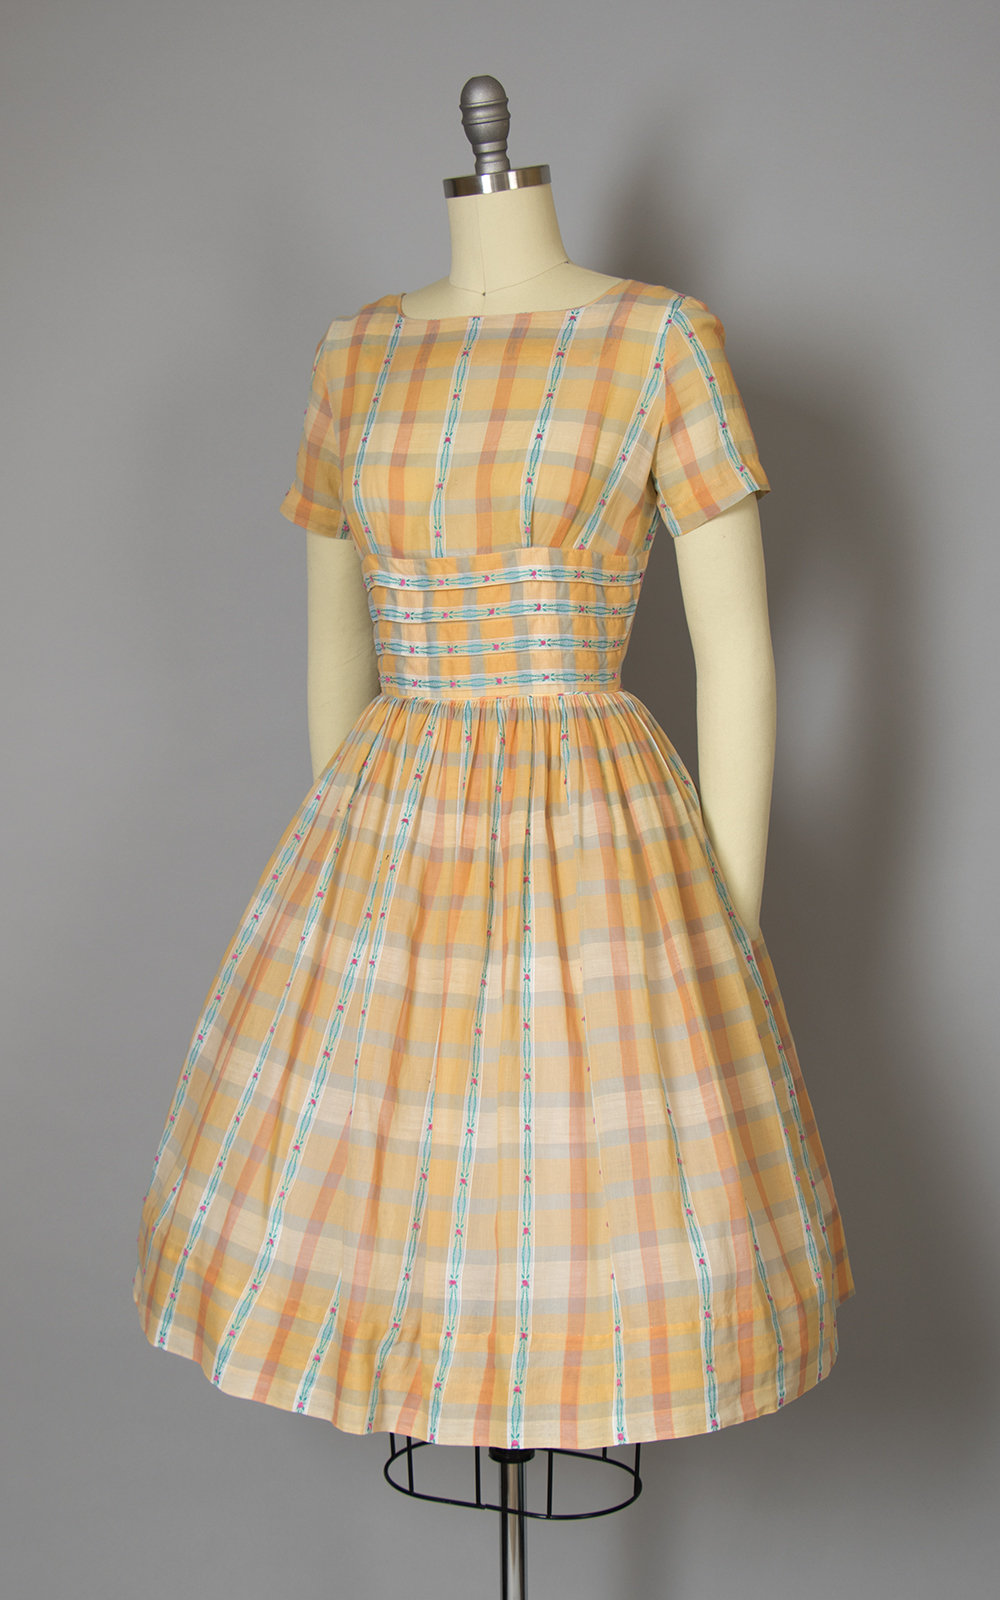 Vintage 1950s Dress | 50s Peach Peach Plaid Floral Woven Cotton Voile Full Skirt Day Dress (x-small)